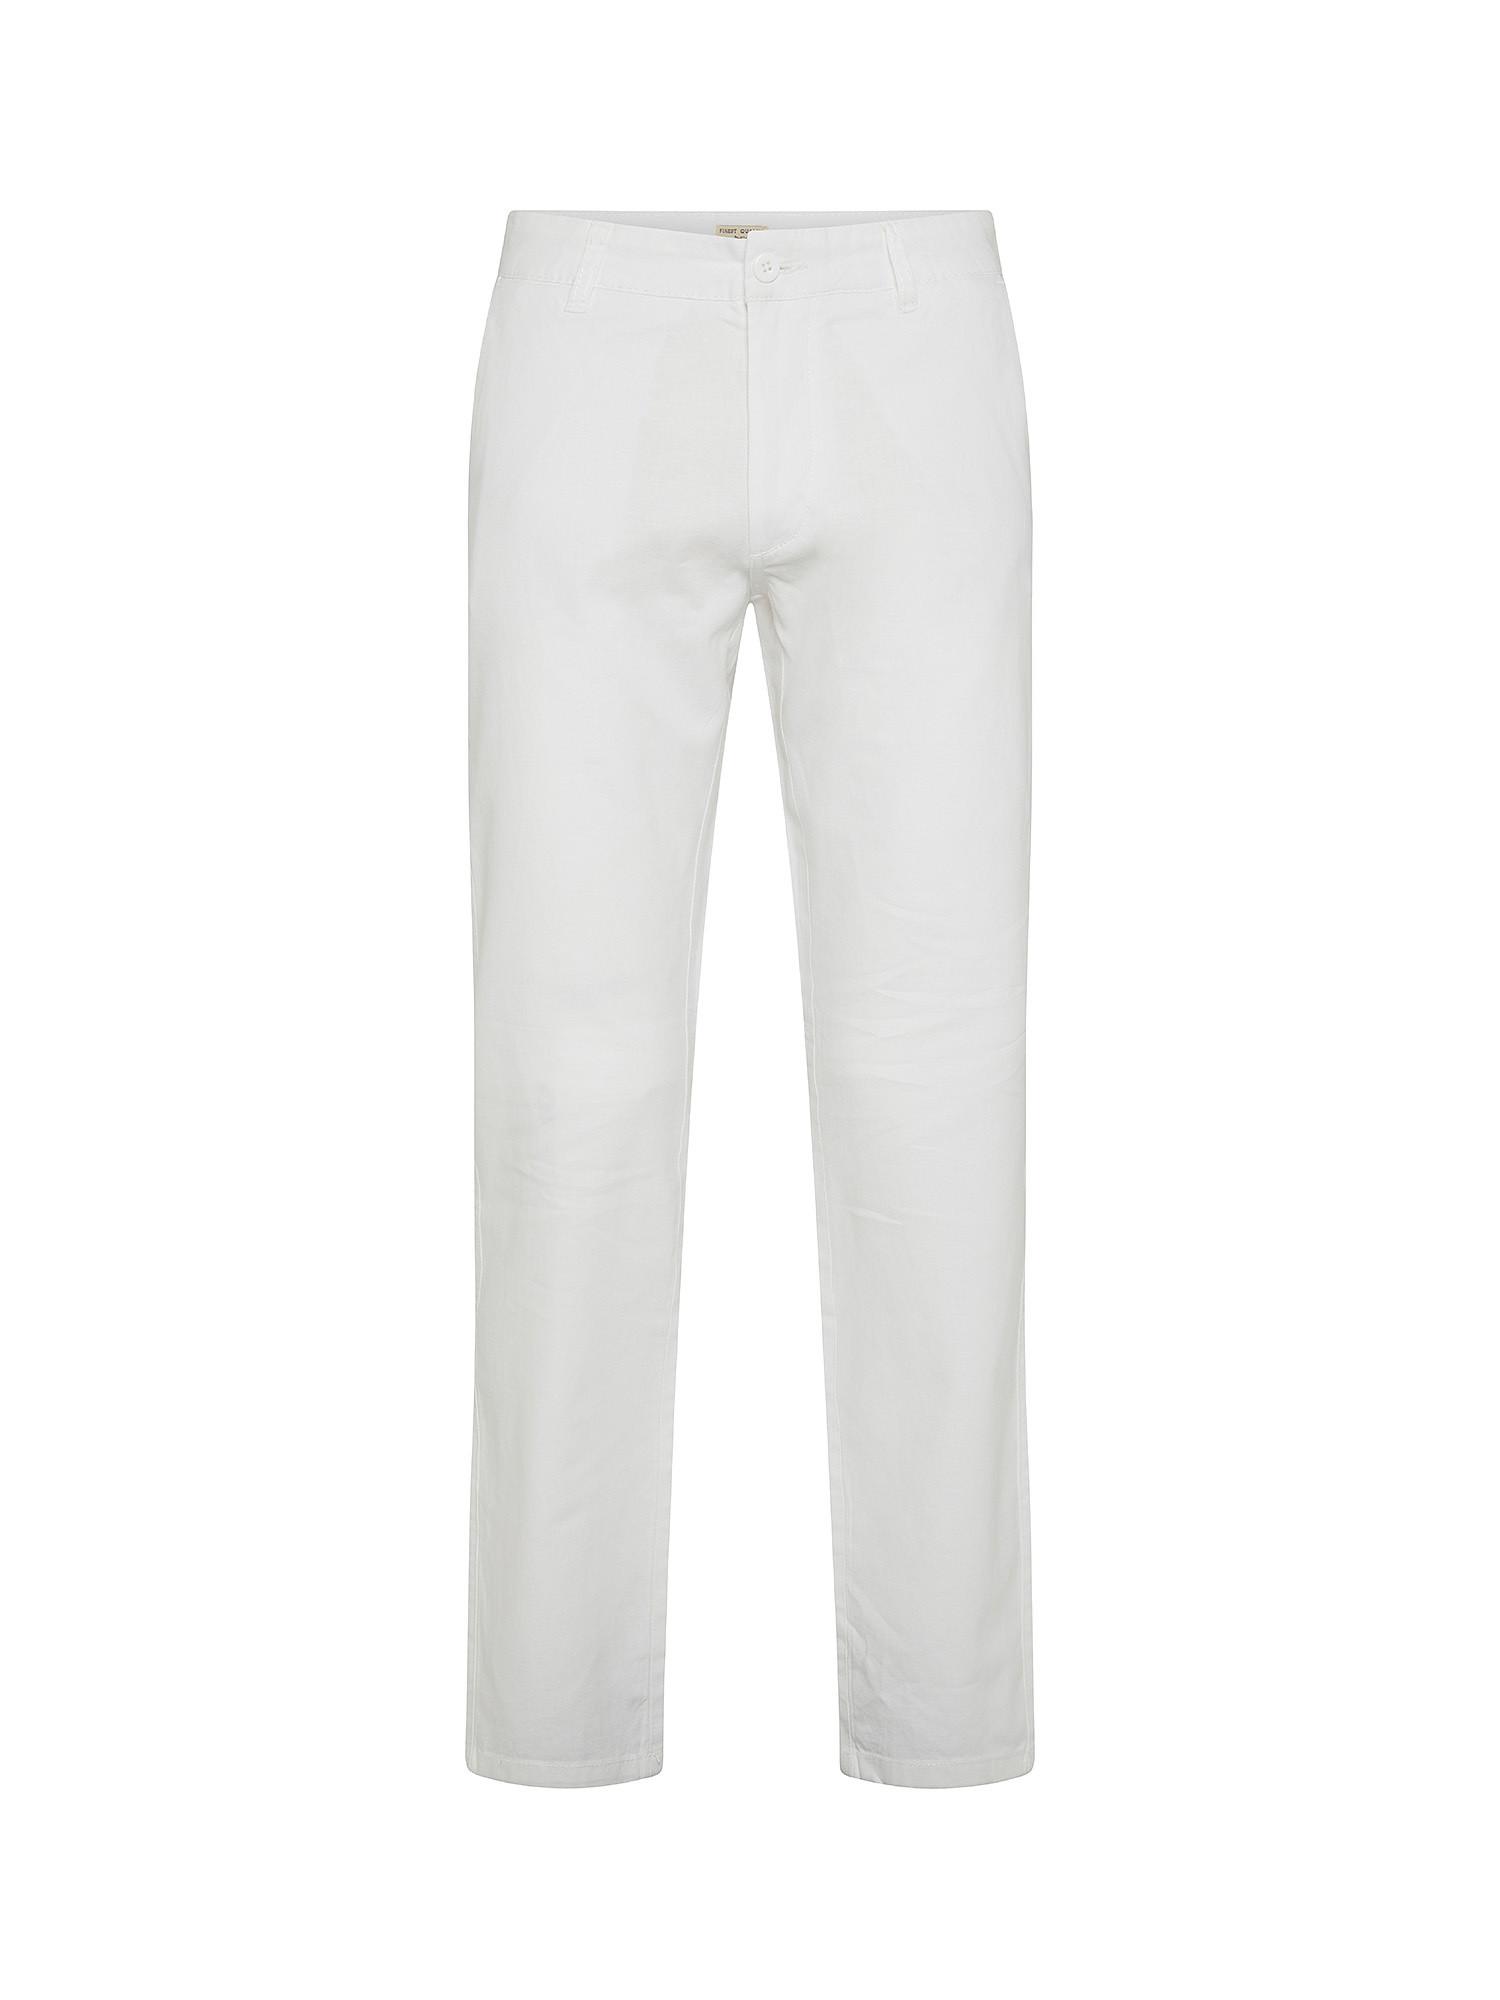 JCT - Linen blend chinos, White, large image number 0